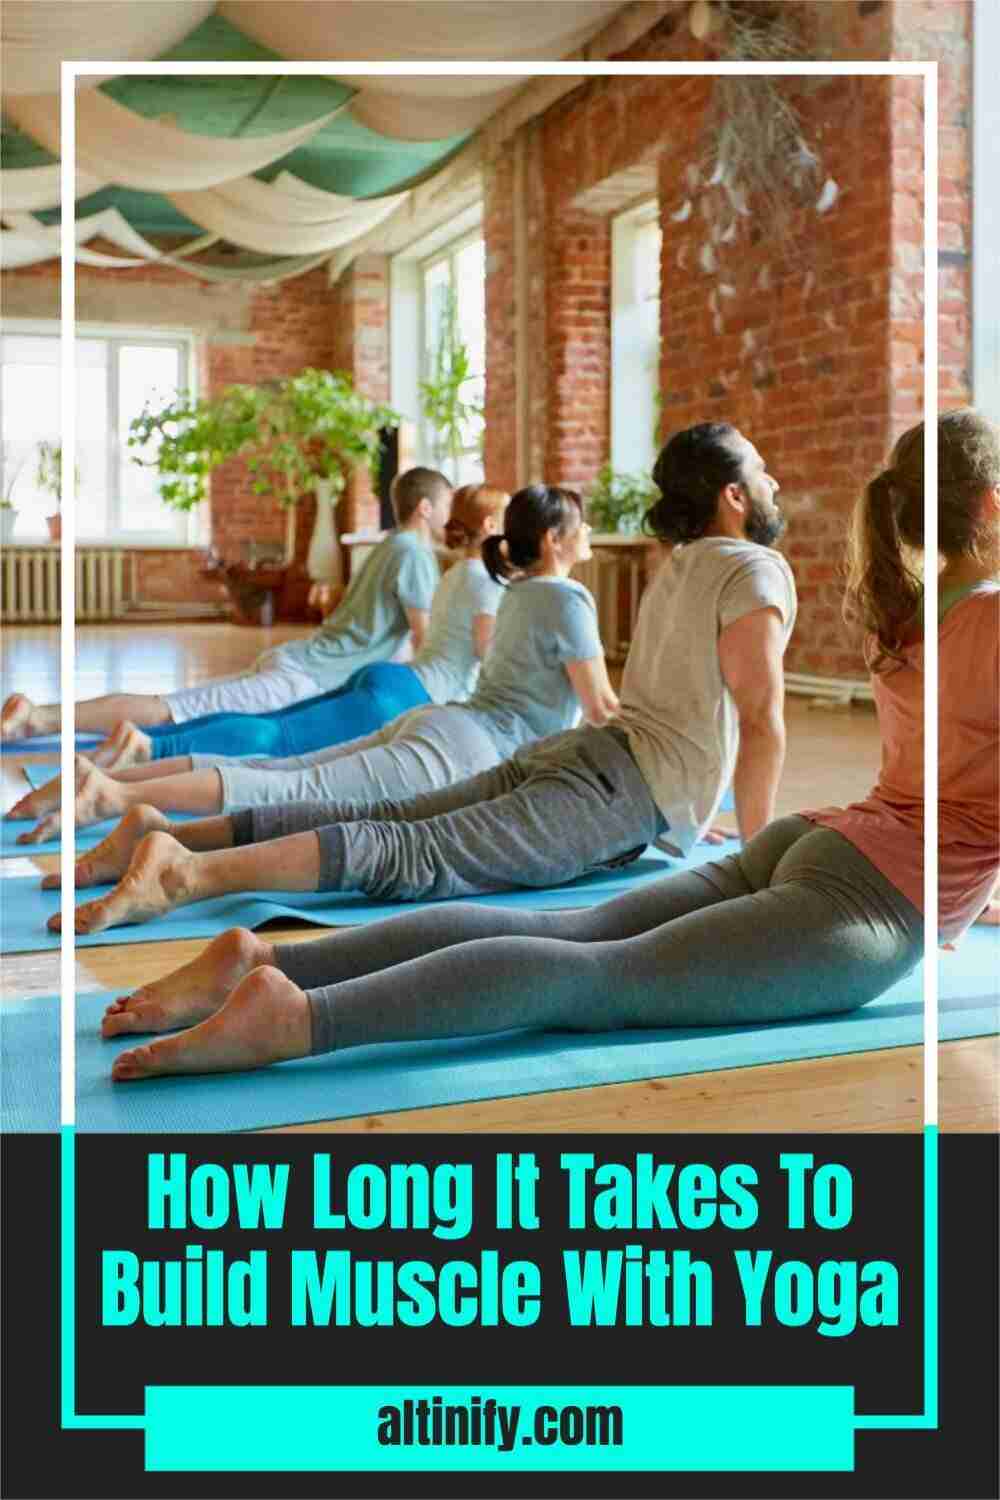 This Is How Long It Takes To Build Muscle With Yoga